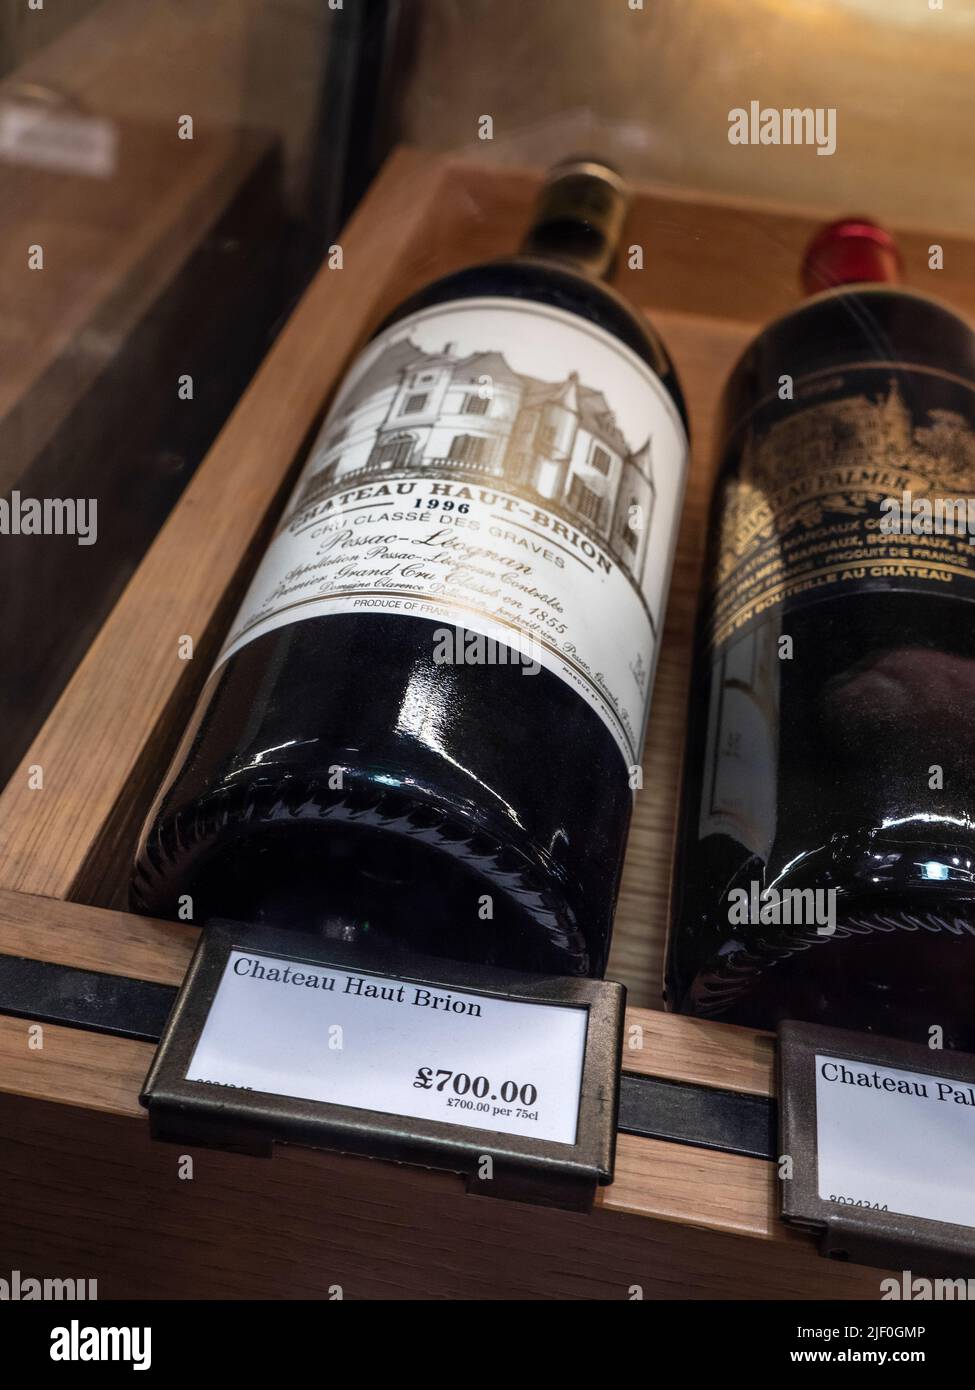 Chateau Haut Brion bottle and price label.  Fortnum & Mason Food & Drinks Hall interior with luxury wine cabinet display of Bordeaux wine bottle Chateau Haut Brion 1996 on sale priced at £700 Fortnum & Mason Food & Drinks Hall store Piccadilly St. James's, London W1A 1ER Stock Photo